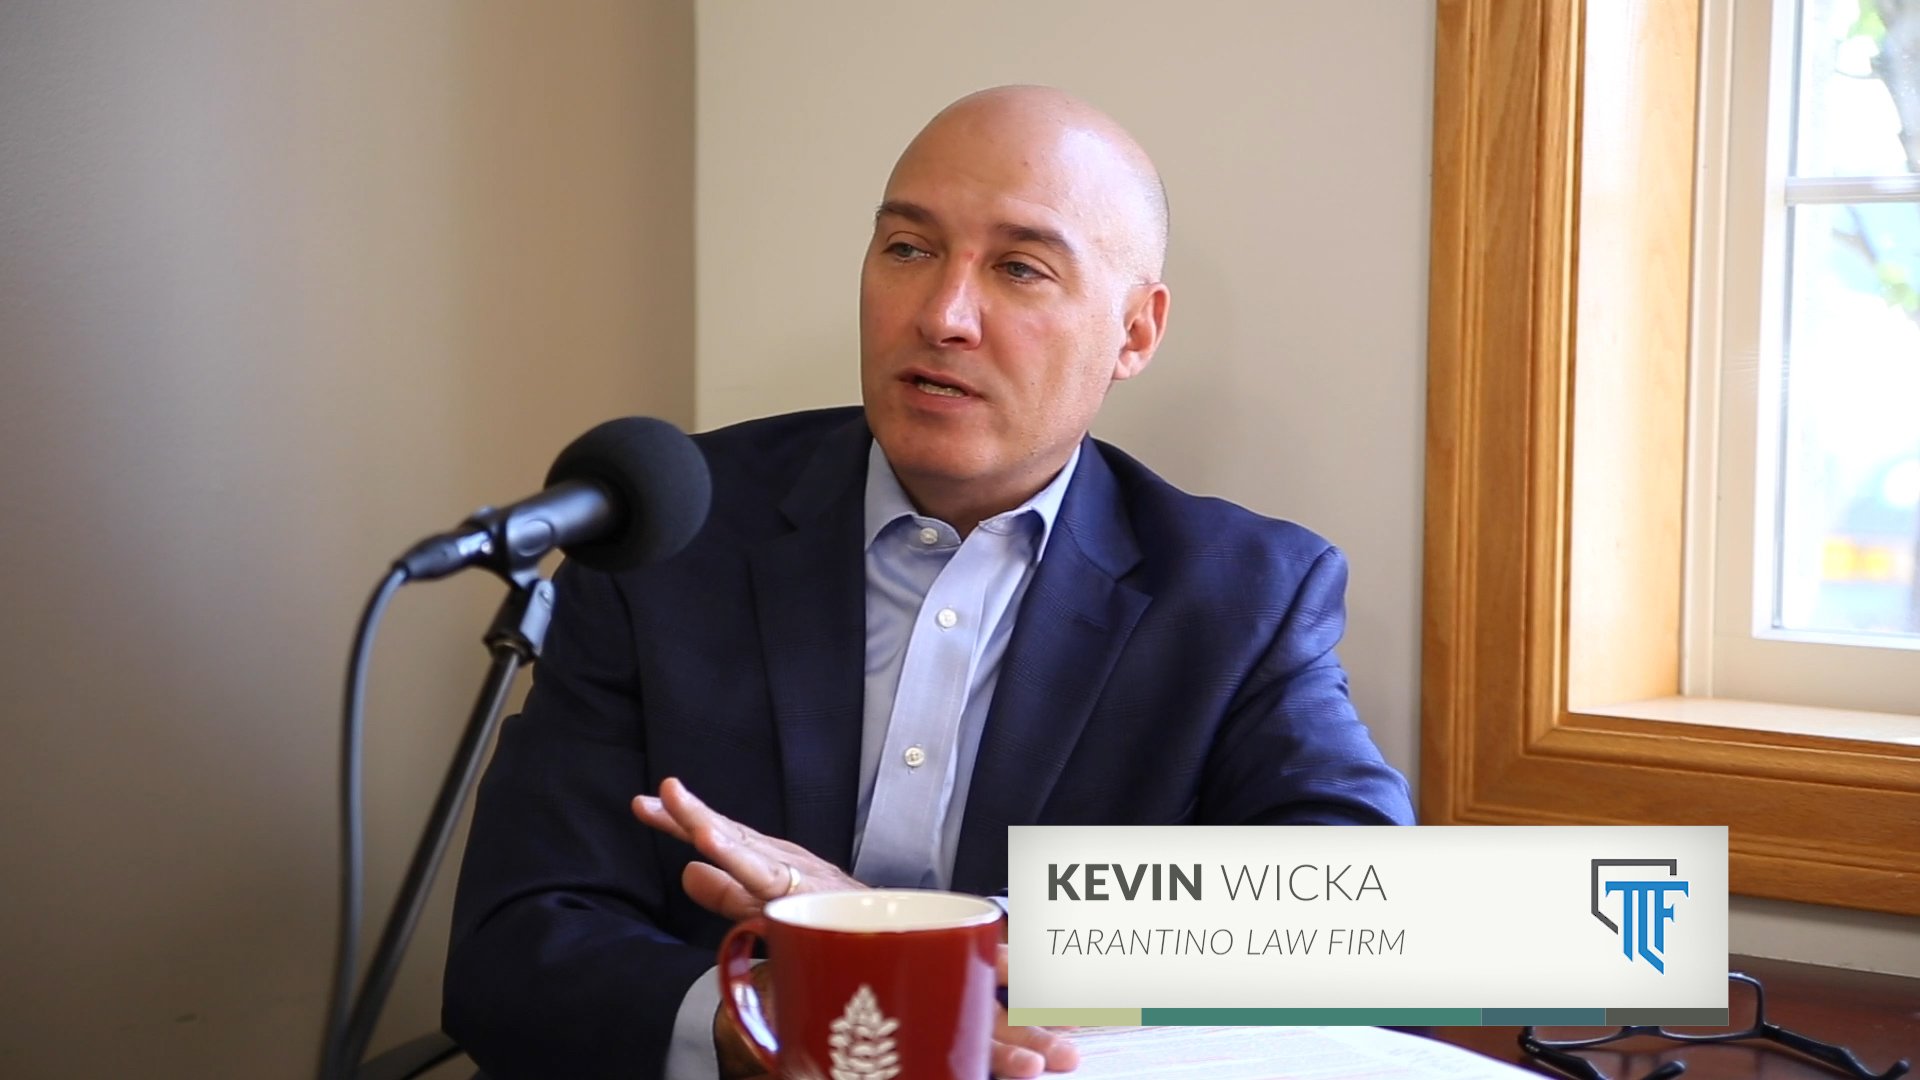 PeopleWork | Kevin Wicka & Austin Fish: NYS Paid Sick Leave [VIDEO]